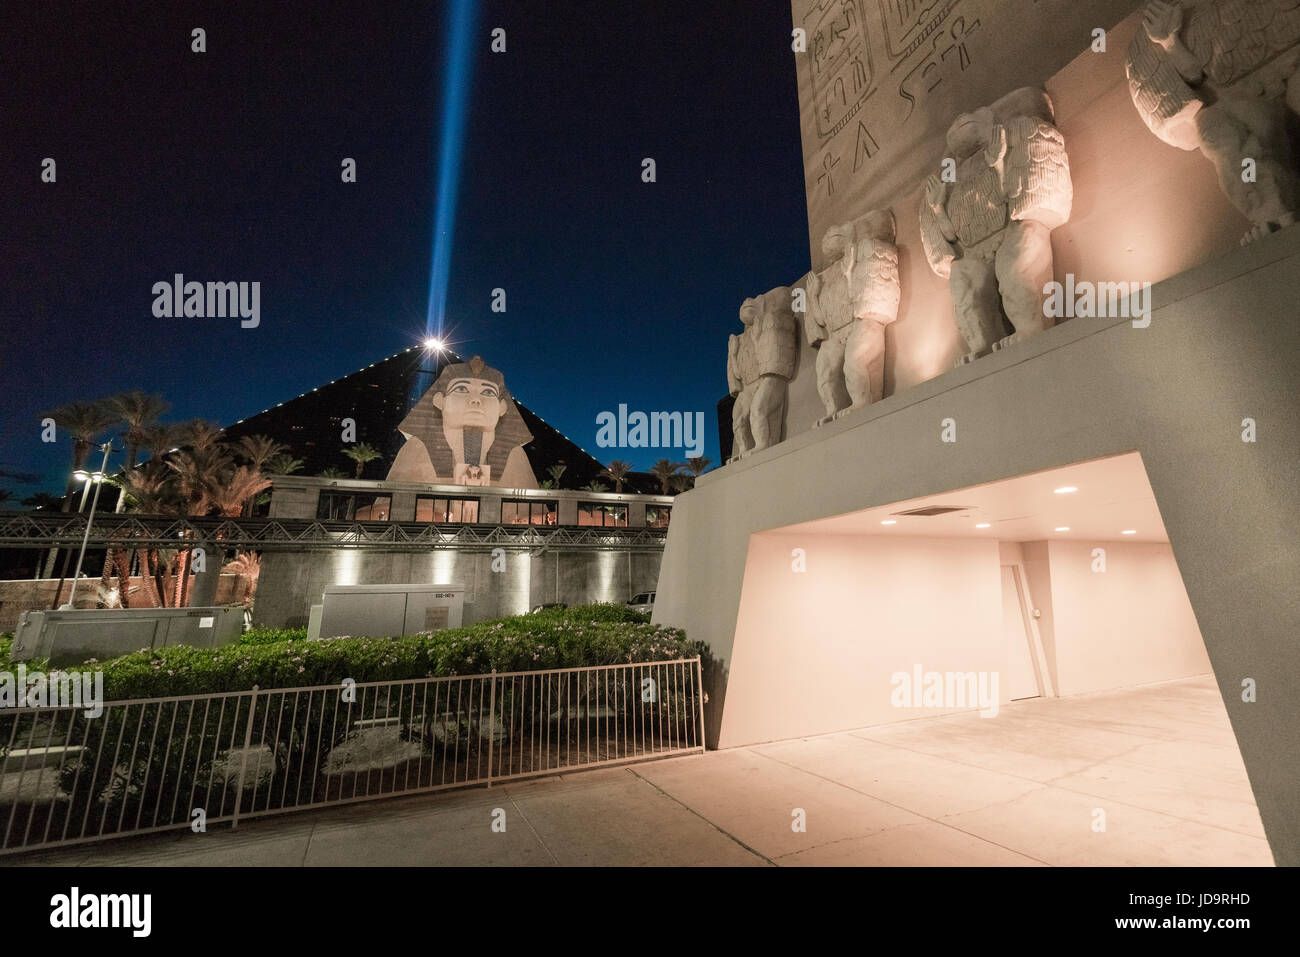 Luxor attraction with sphinx and blue laser beam, Las Vegas, Nevada, USA. Stock Photo